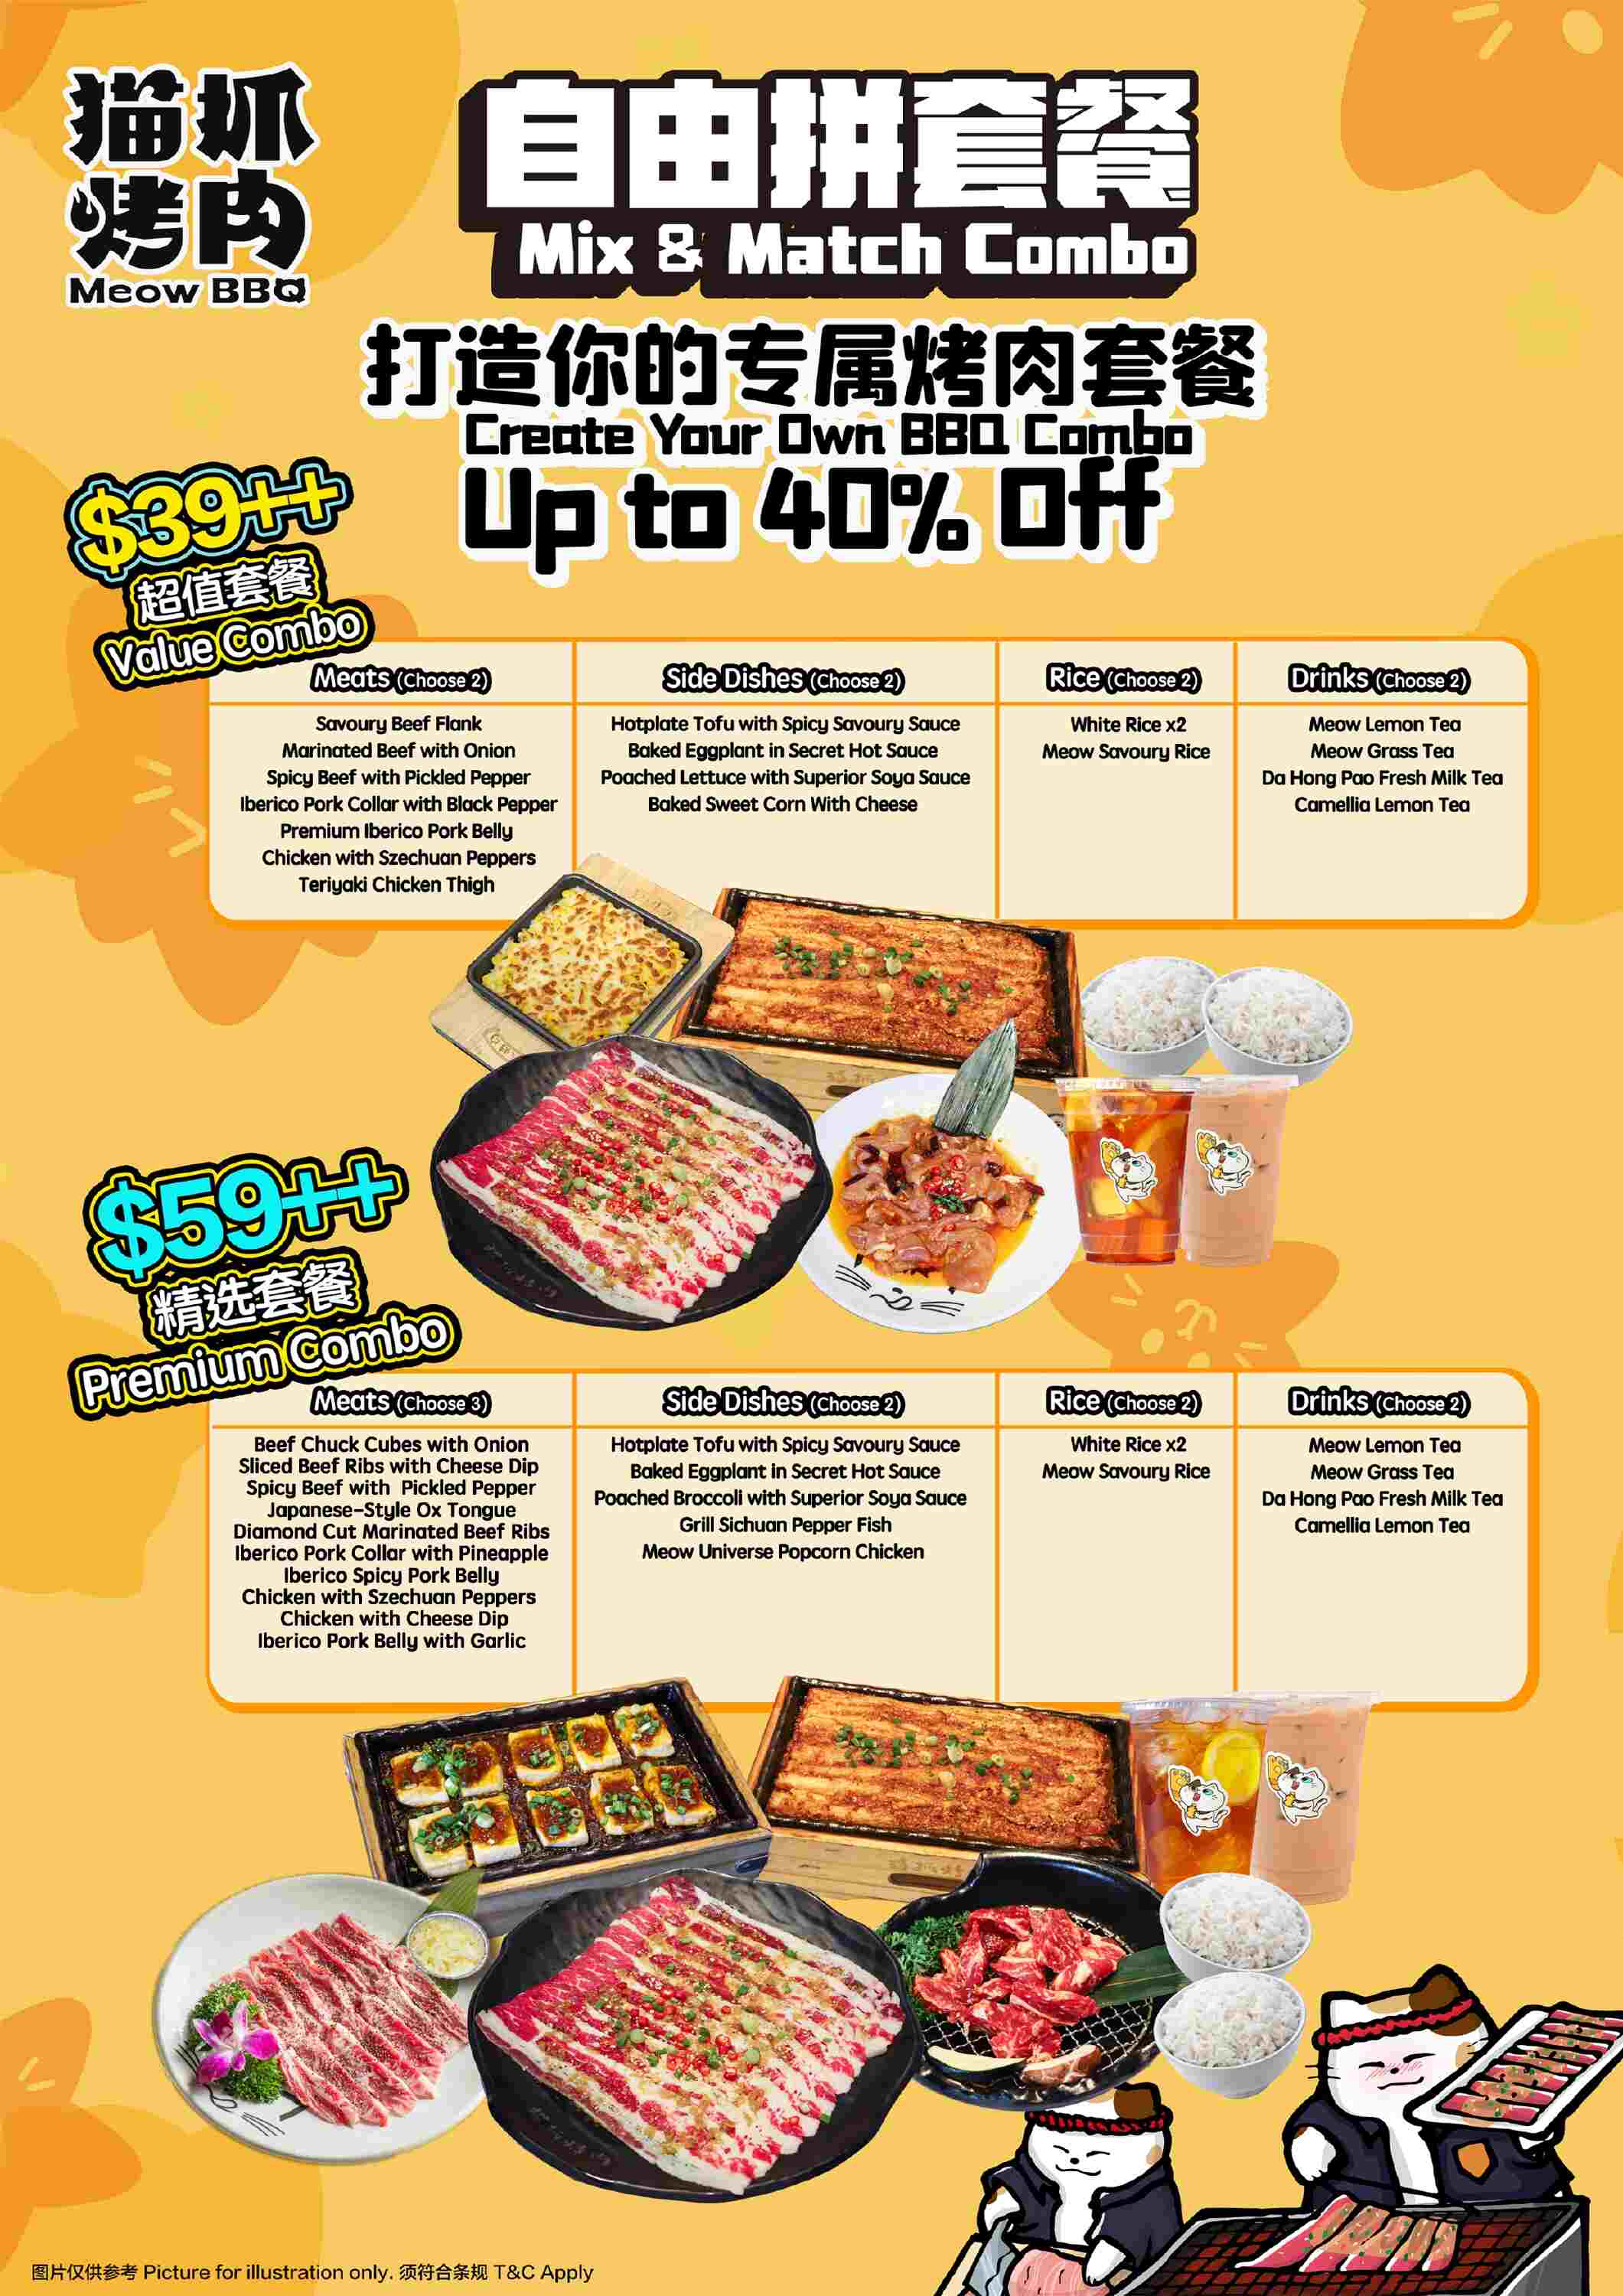 Meow Barbecue,Create your Mix & Match Combo Save up to 40%